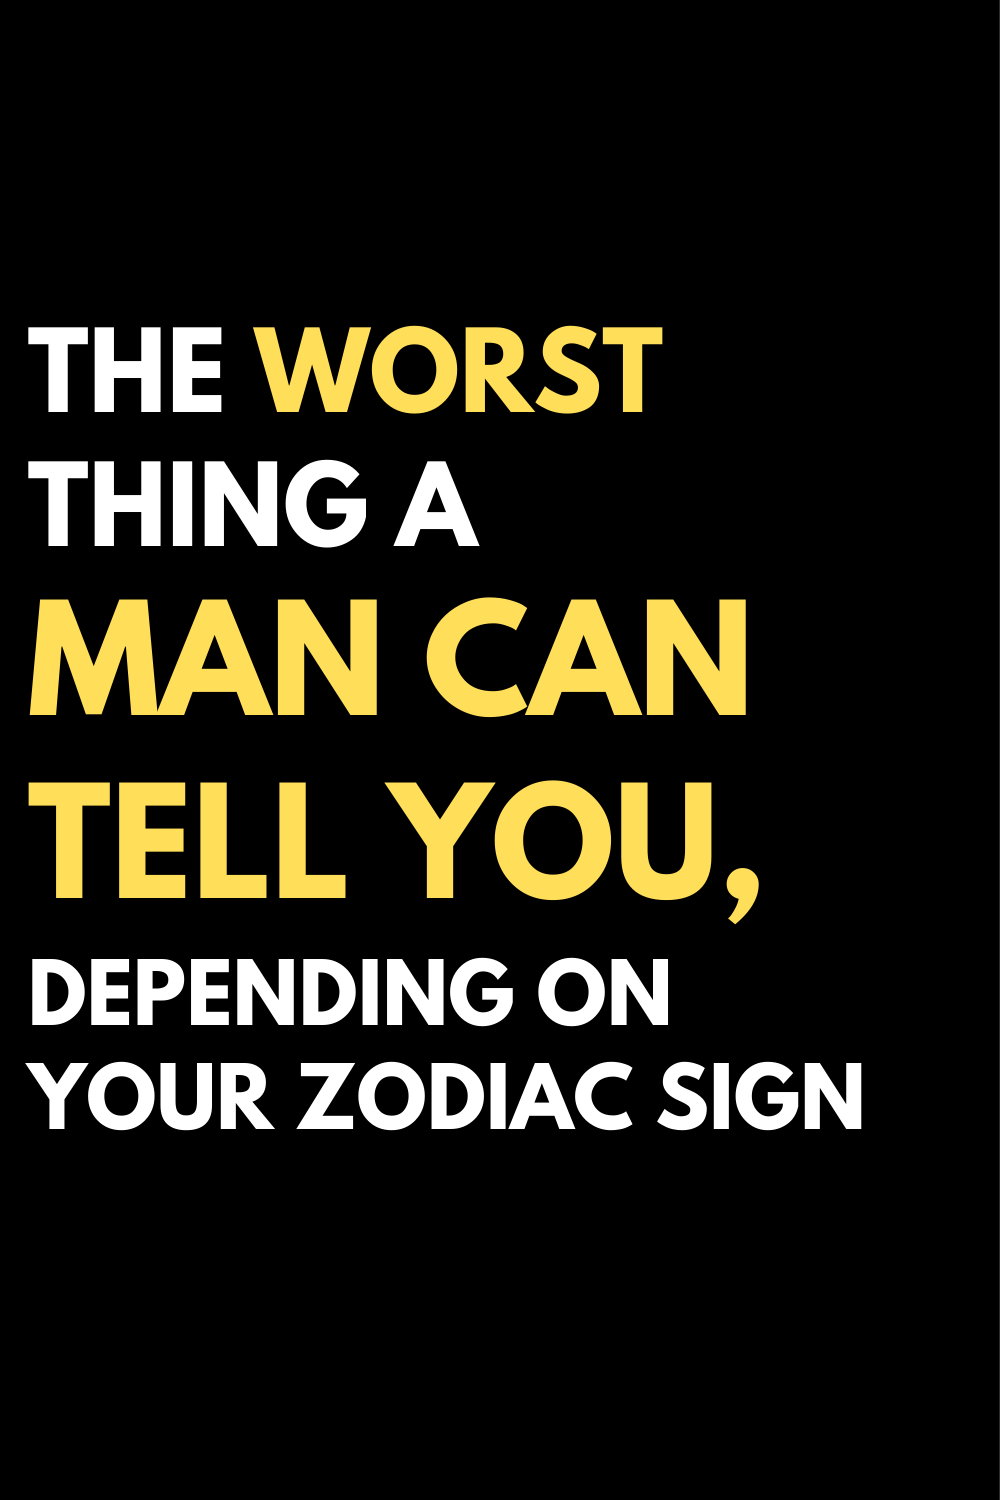 The worst thing a man can tell you, depending on your zodiac sign